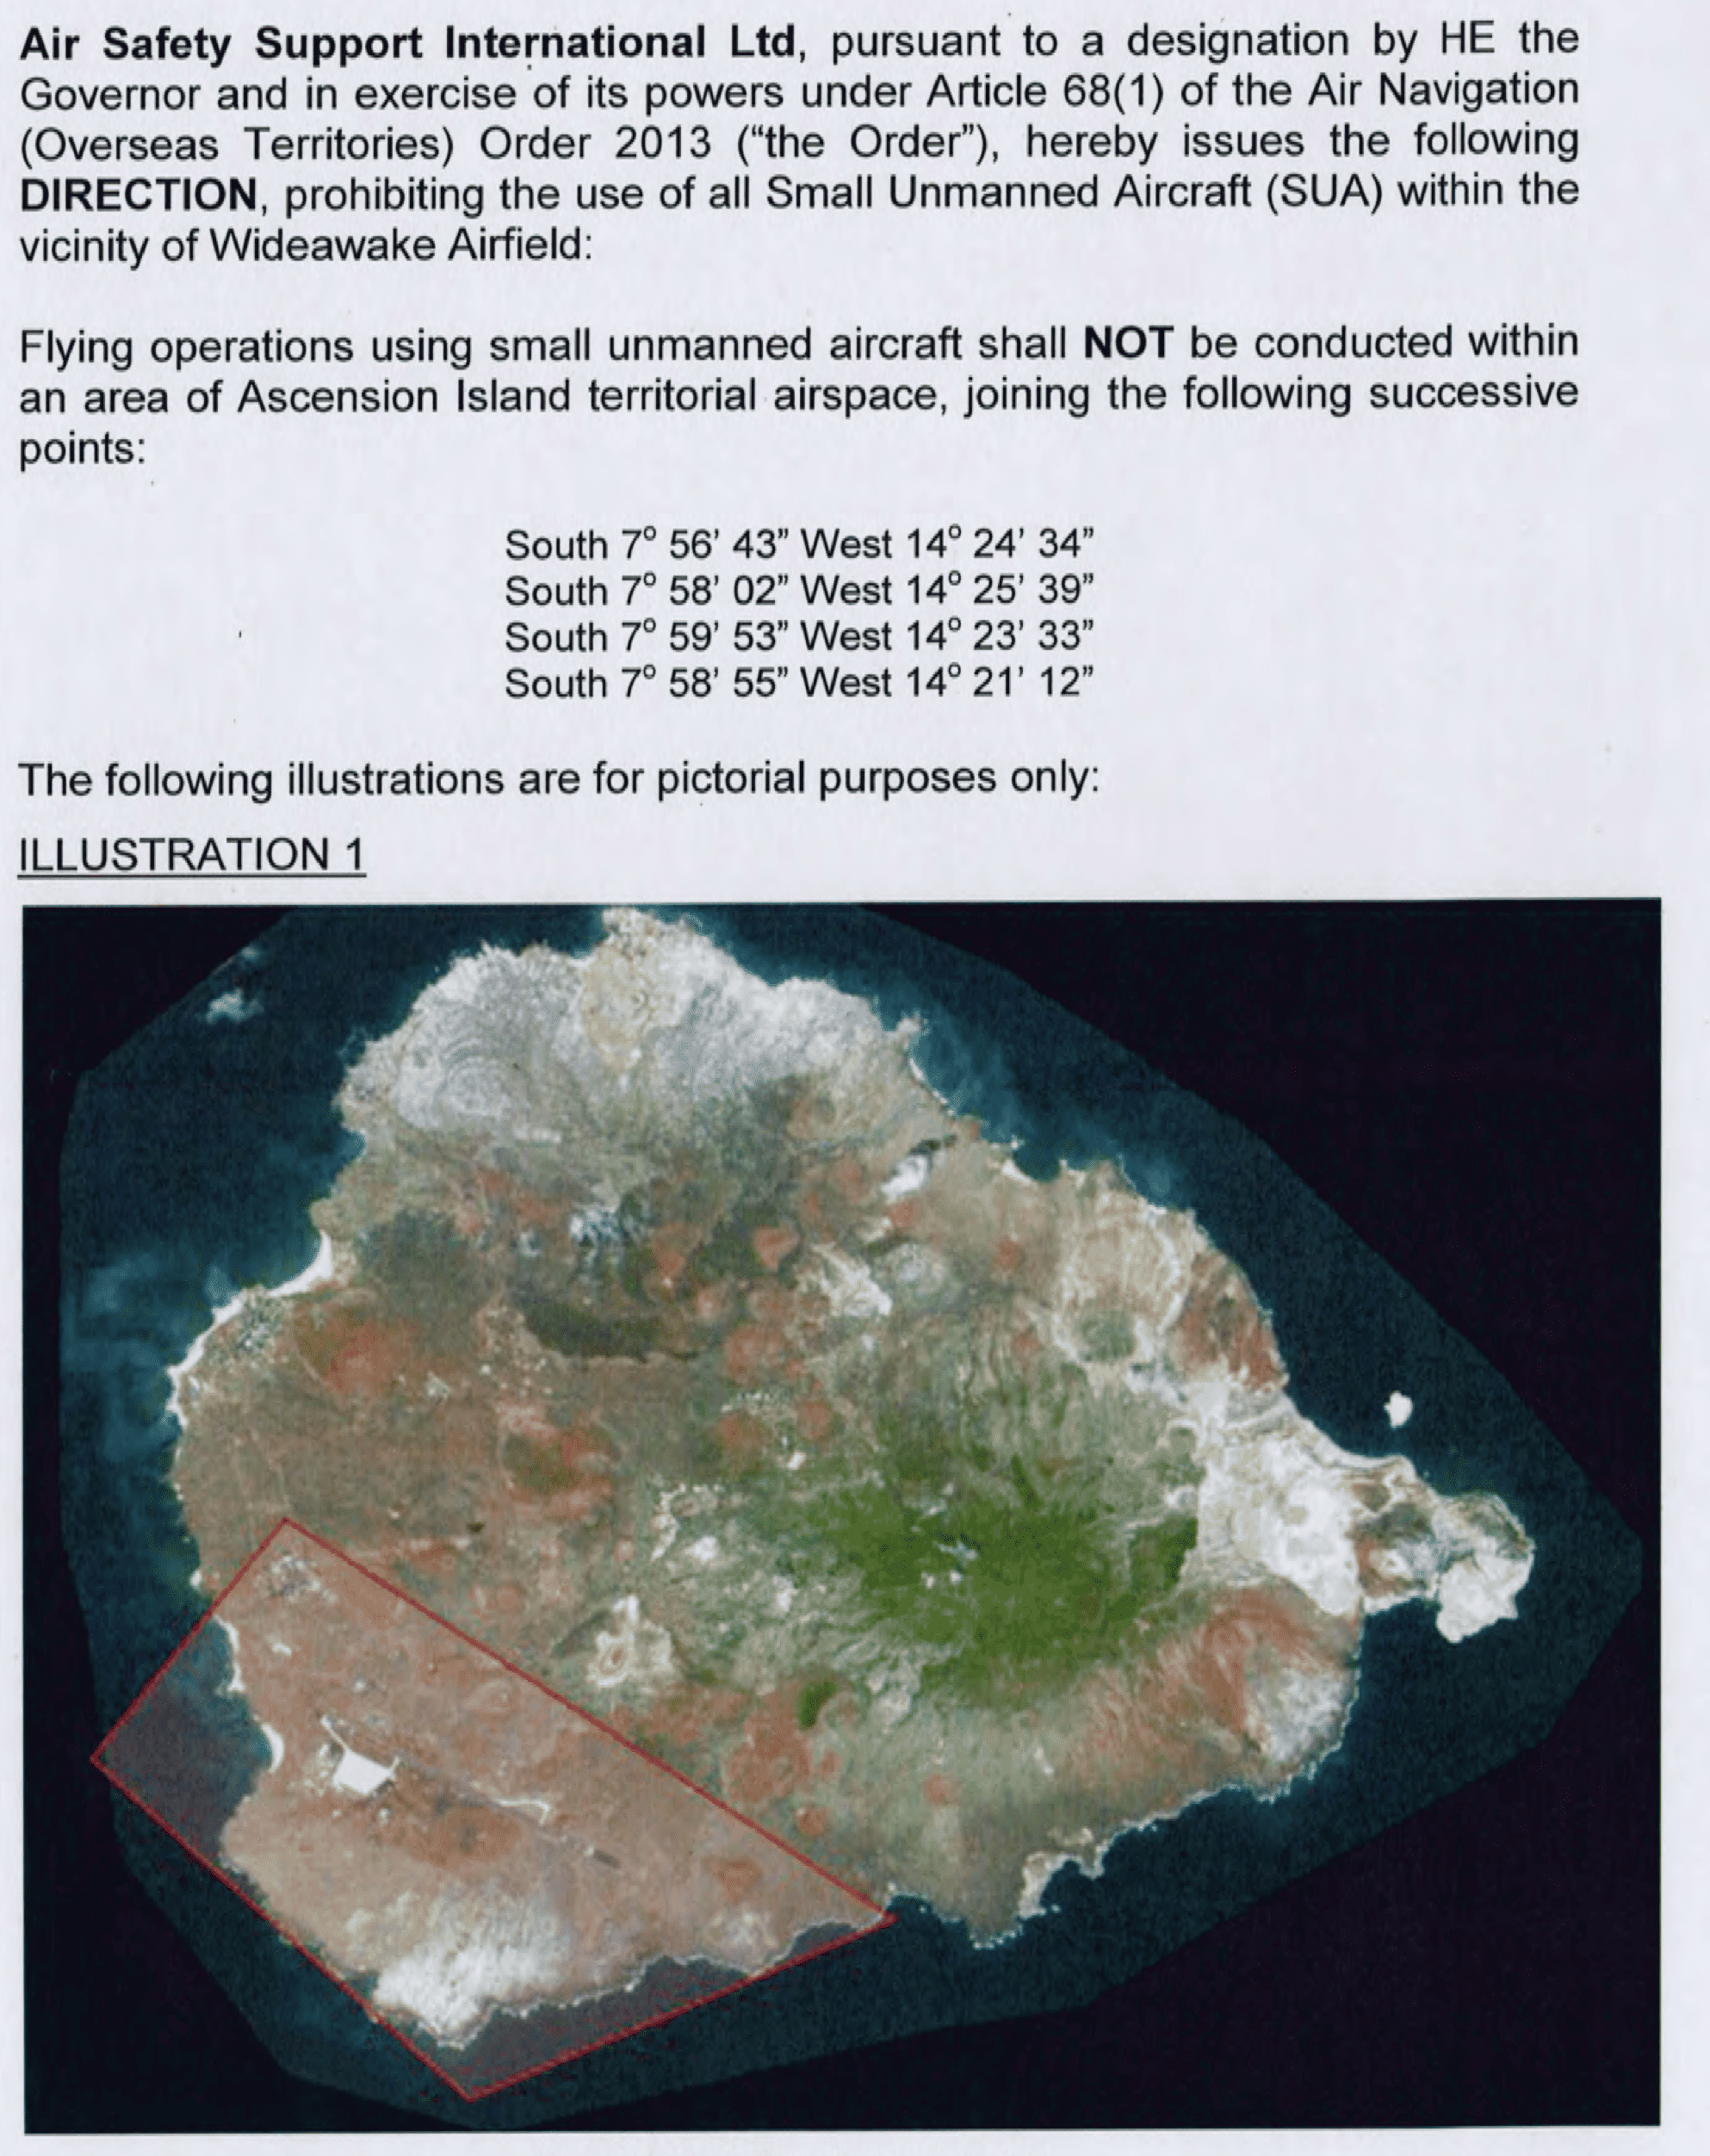 Ascension Island drone restrictions